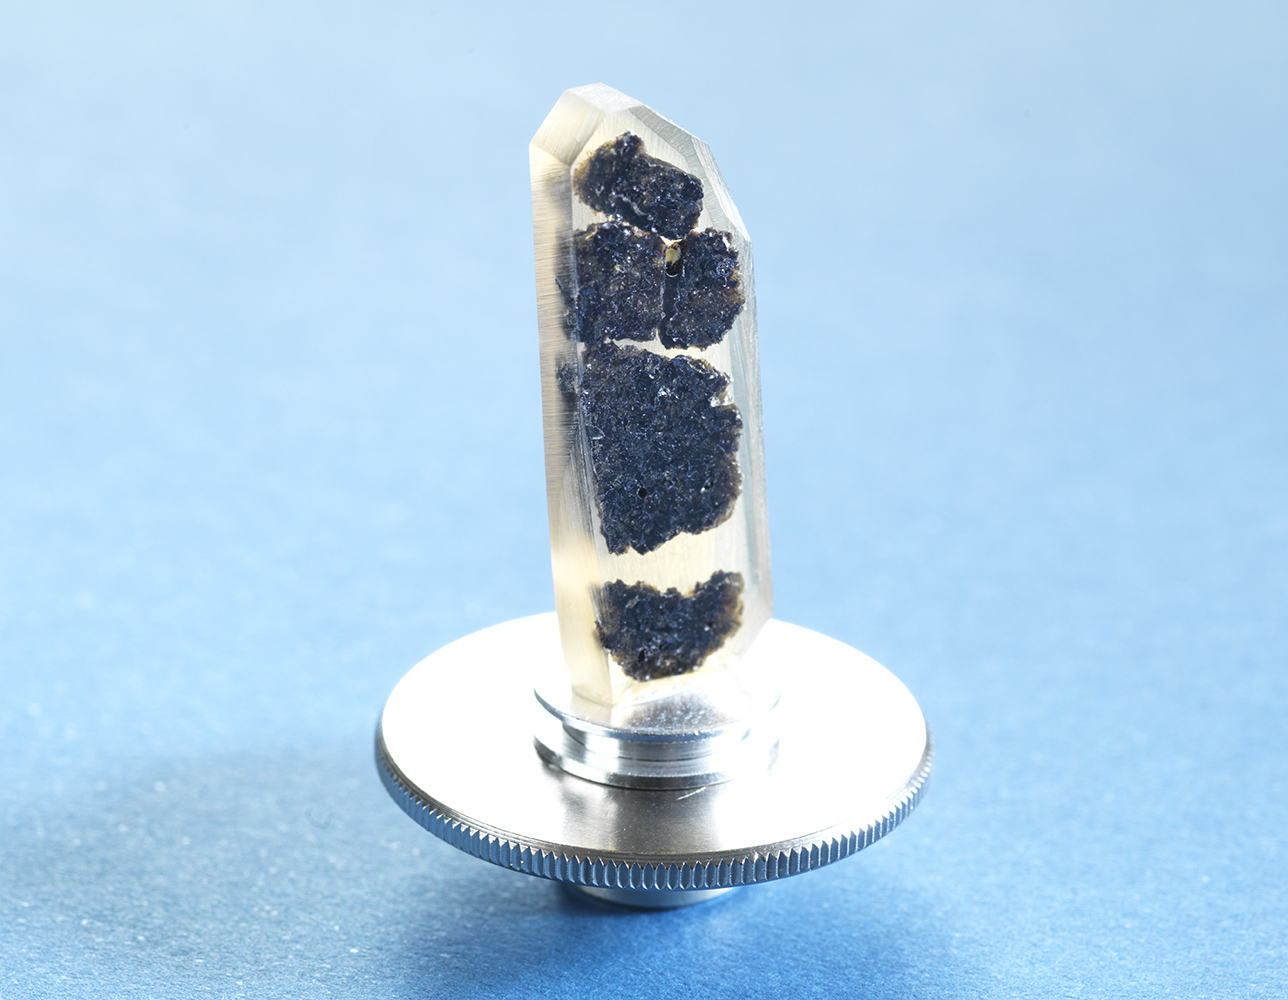 Dr Hongchang Wang, Dr Matt Pankhurst, Dr Ryan Zeigler, and the team studied moon rock samples like these for their olivine content at Diamond